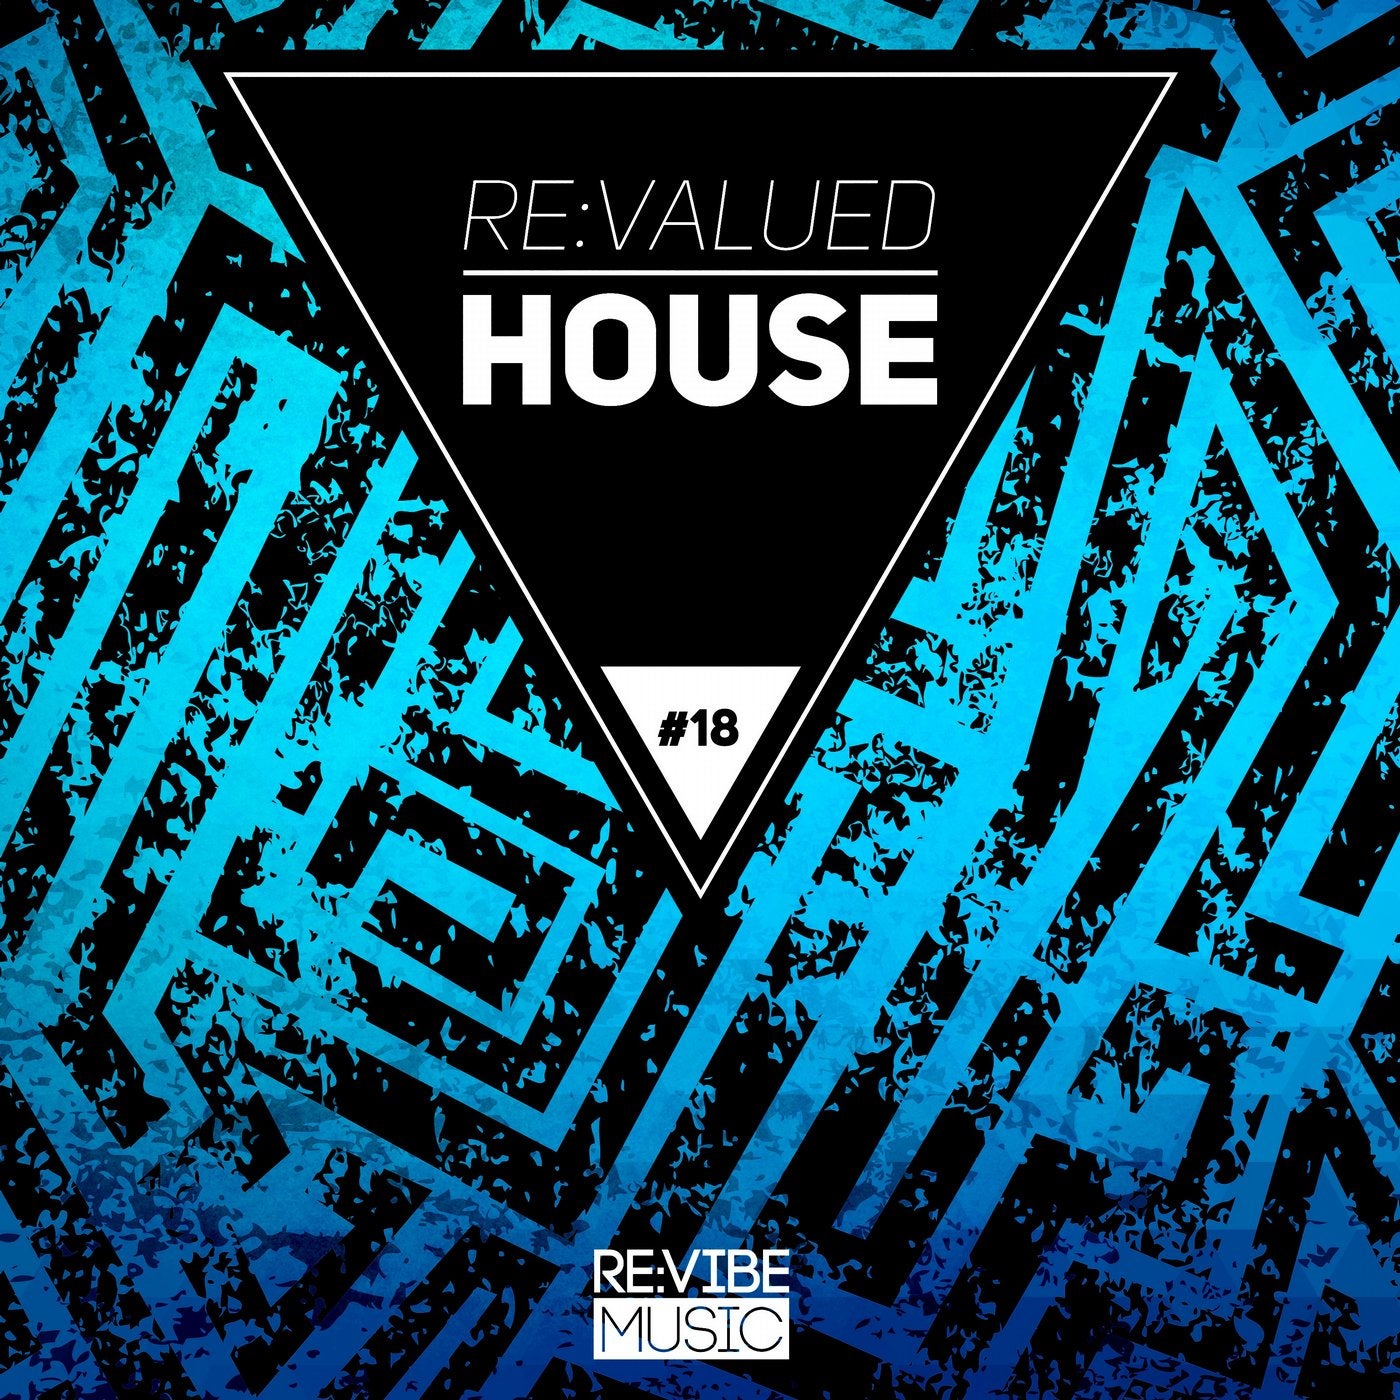 Re:Valued House, Vol. 18